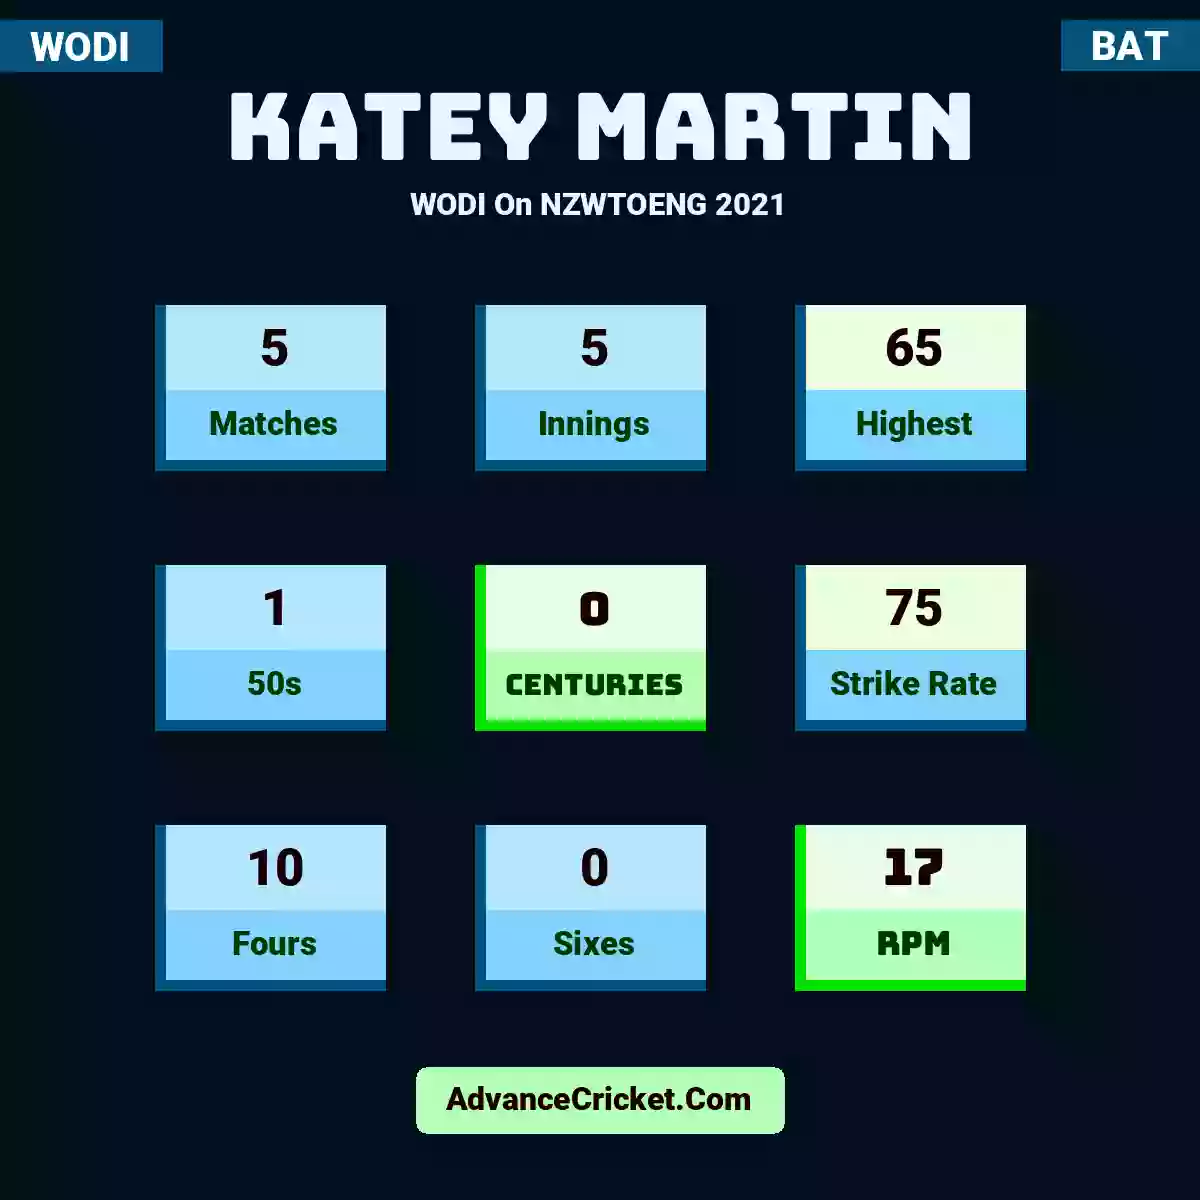 Katey Martin WODI  On NZWTOENG 2021, Katey Martin played 5 matches, scored 65 runs as highest, 1 half-centuries, and 0 centuries, with a strike rate of 75. K.Martin hit 10 fours and 0 sixes, with an RPM of 17.